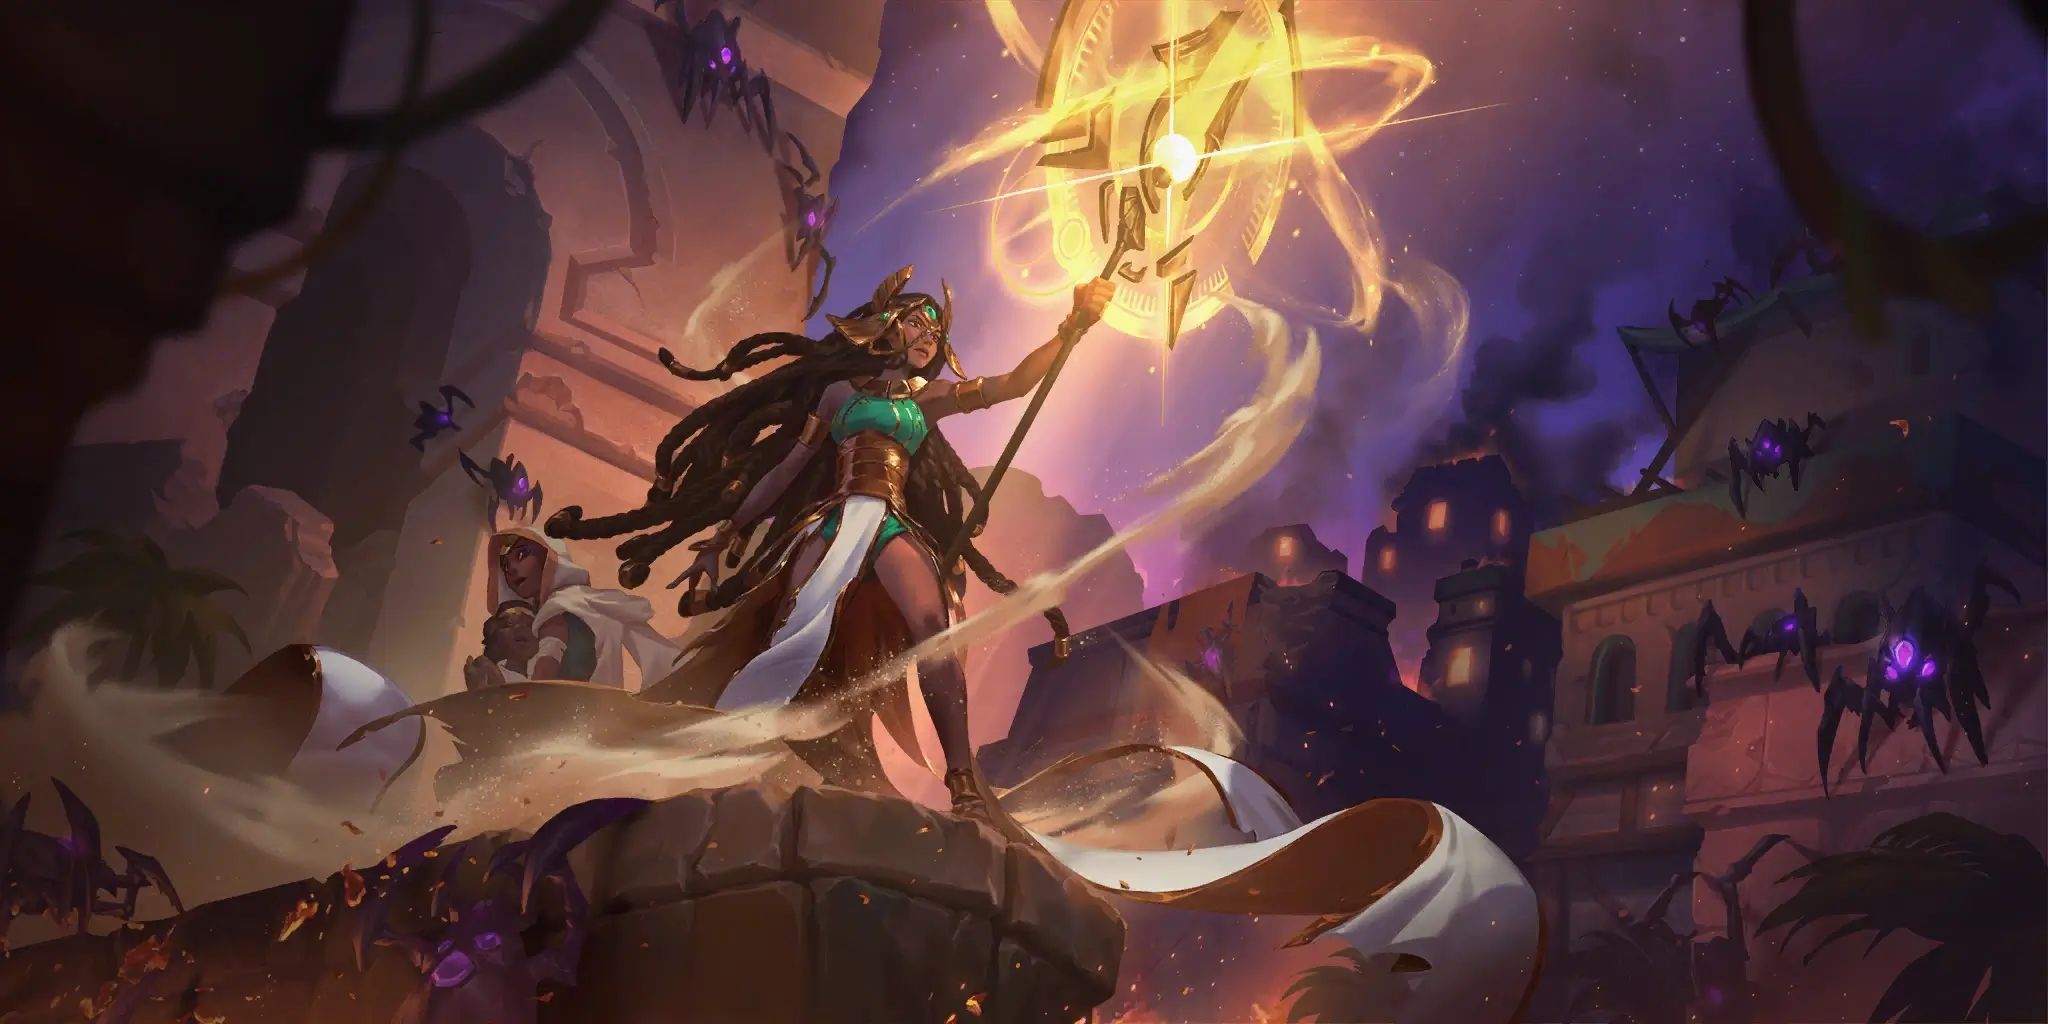 A priestess from Shurima is defending the area from voidborn creatures